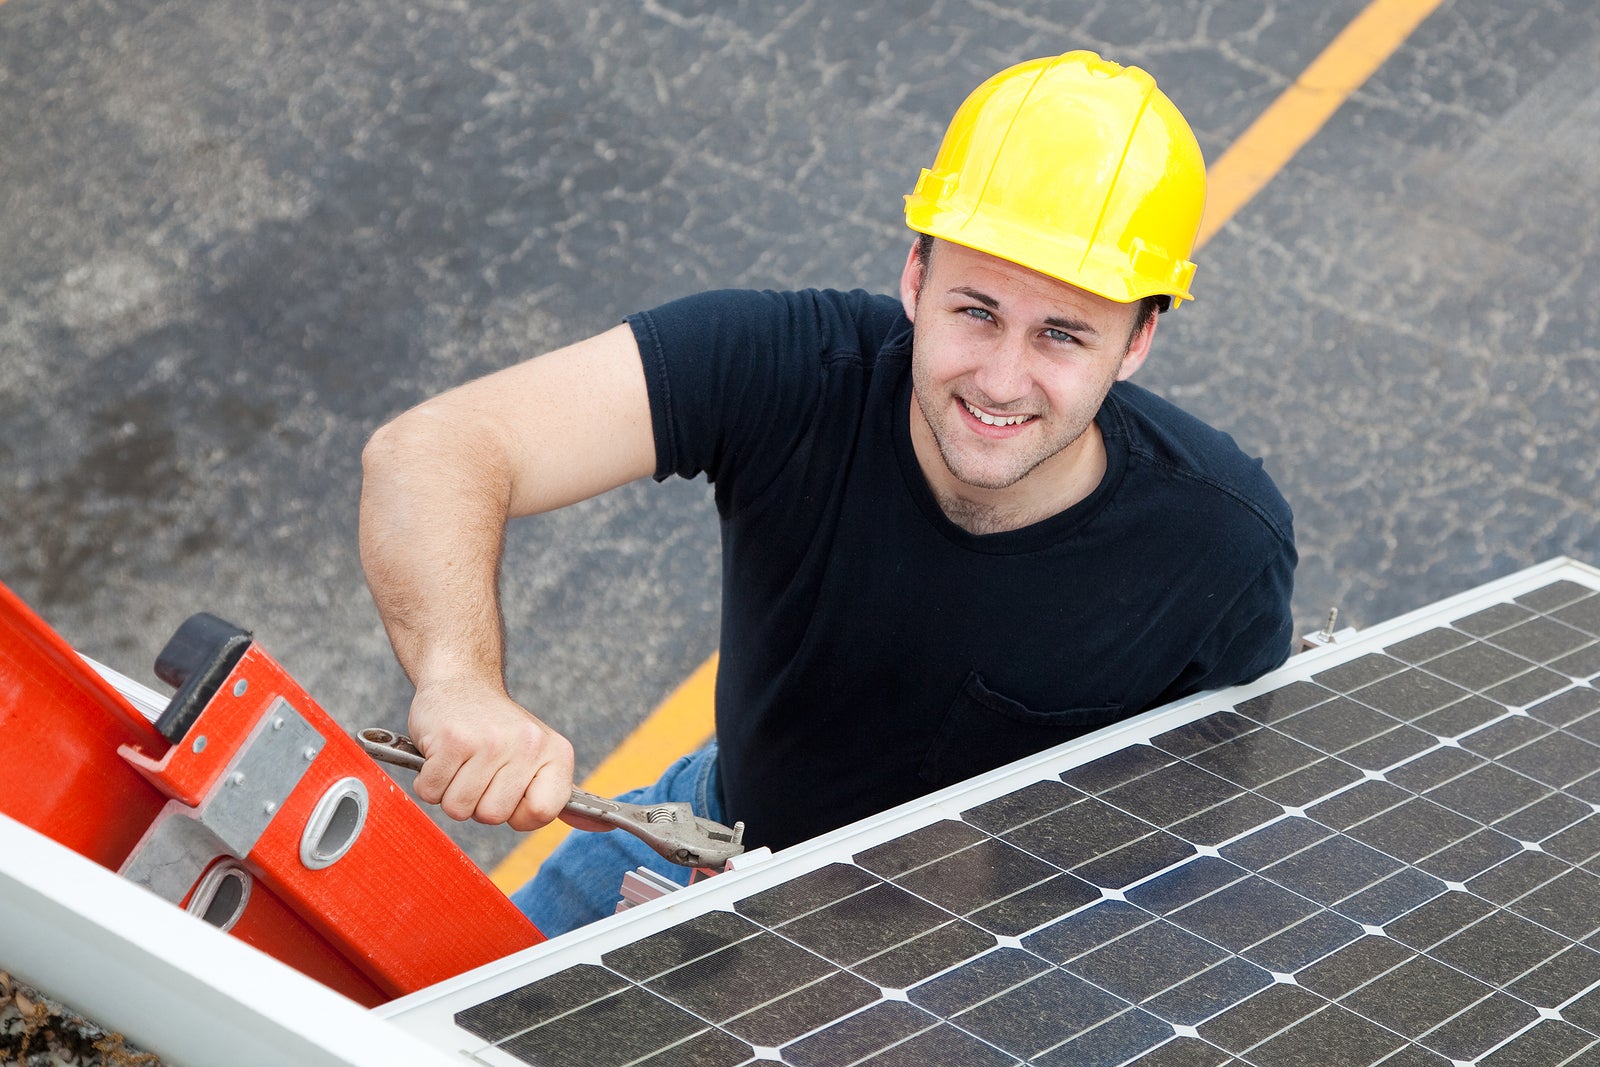 Young electrician on a ladder installing solar panels.